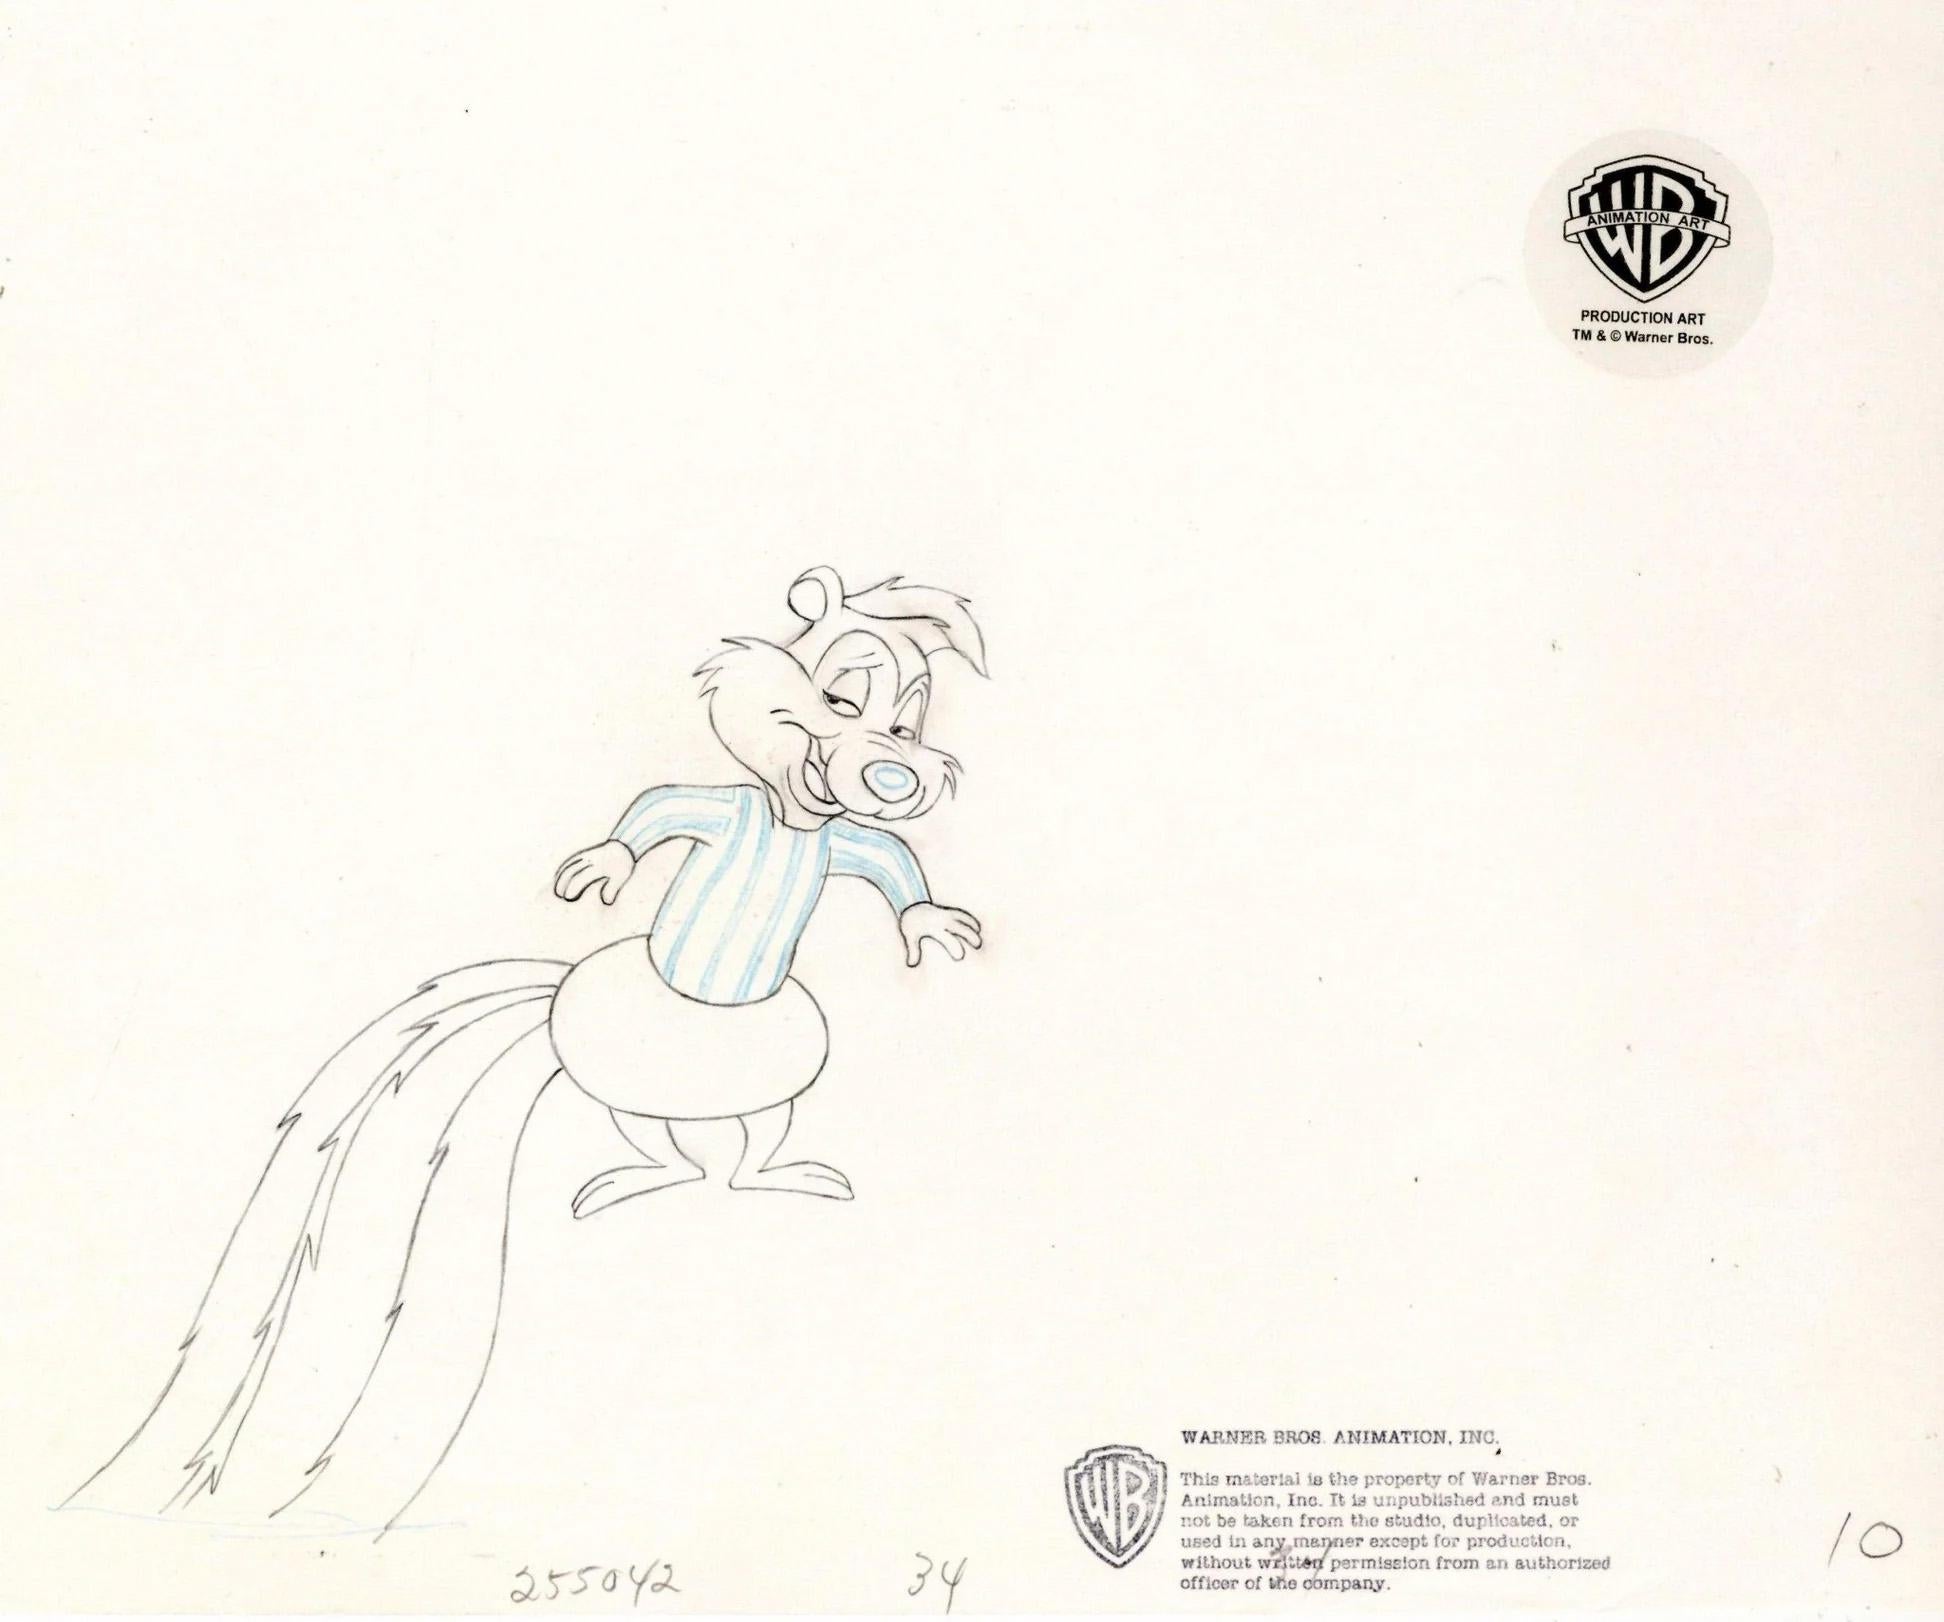 Looney Tunes Original Production Drawing: Pepe Le Pew - Art by Looney Tunes Studio Artists